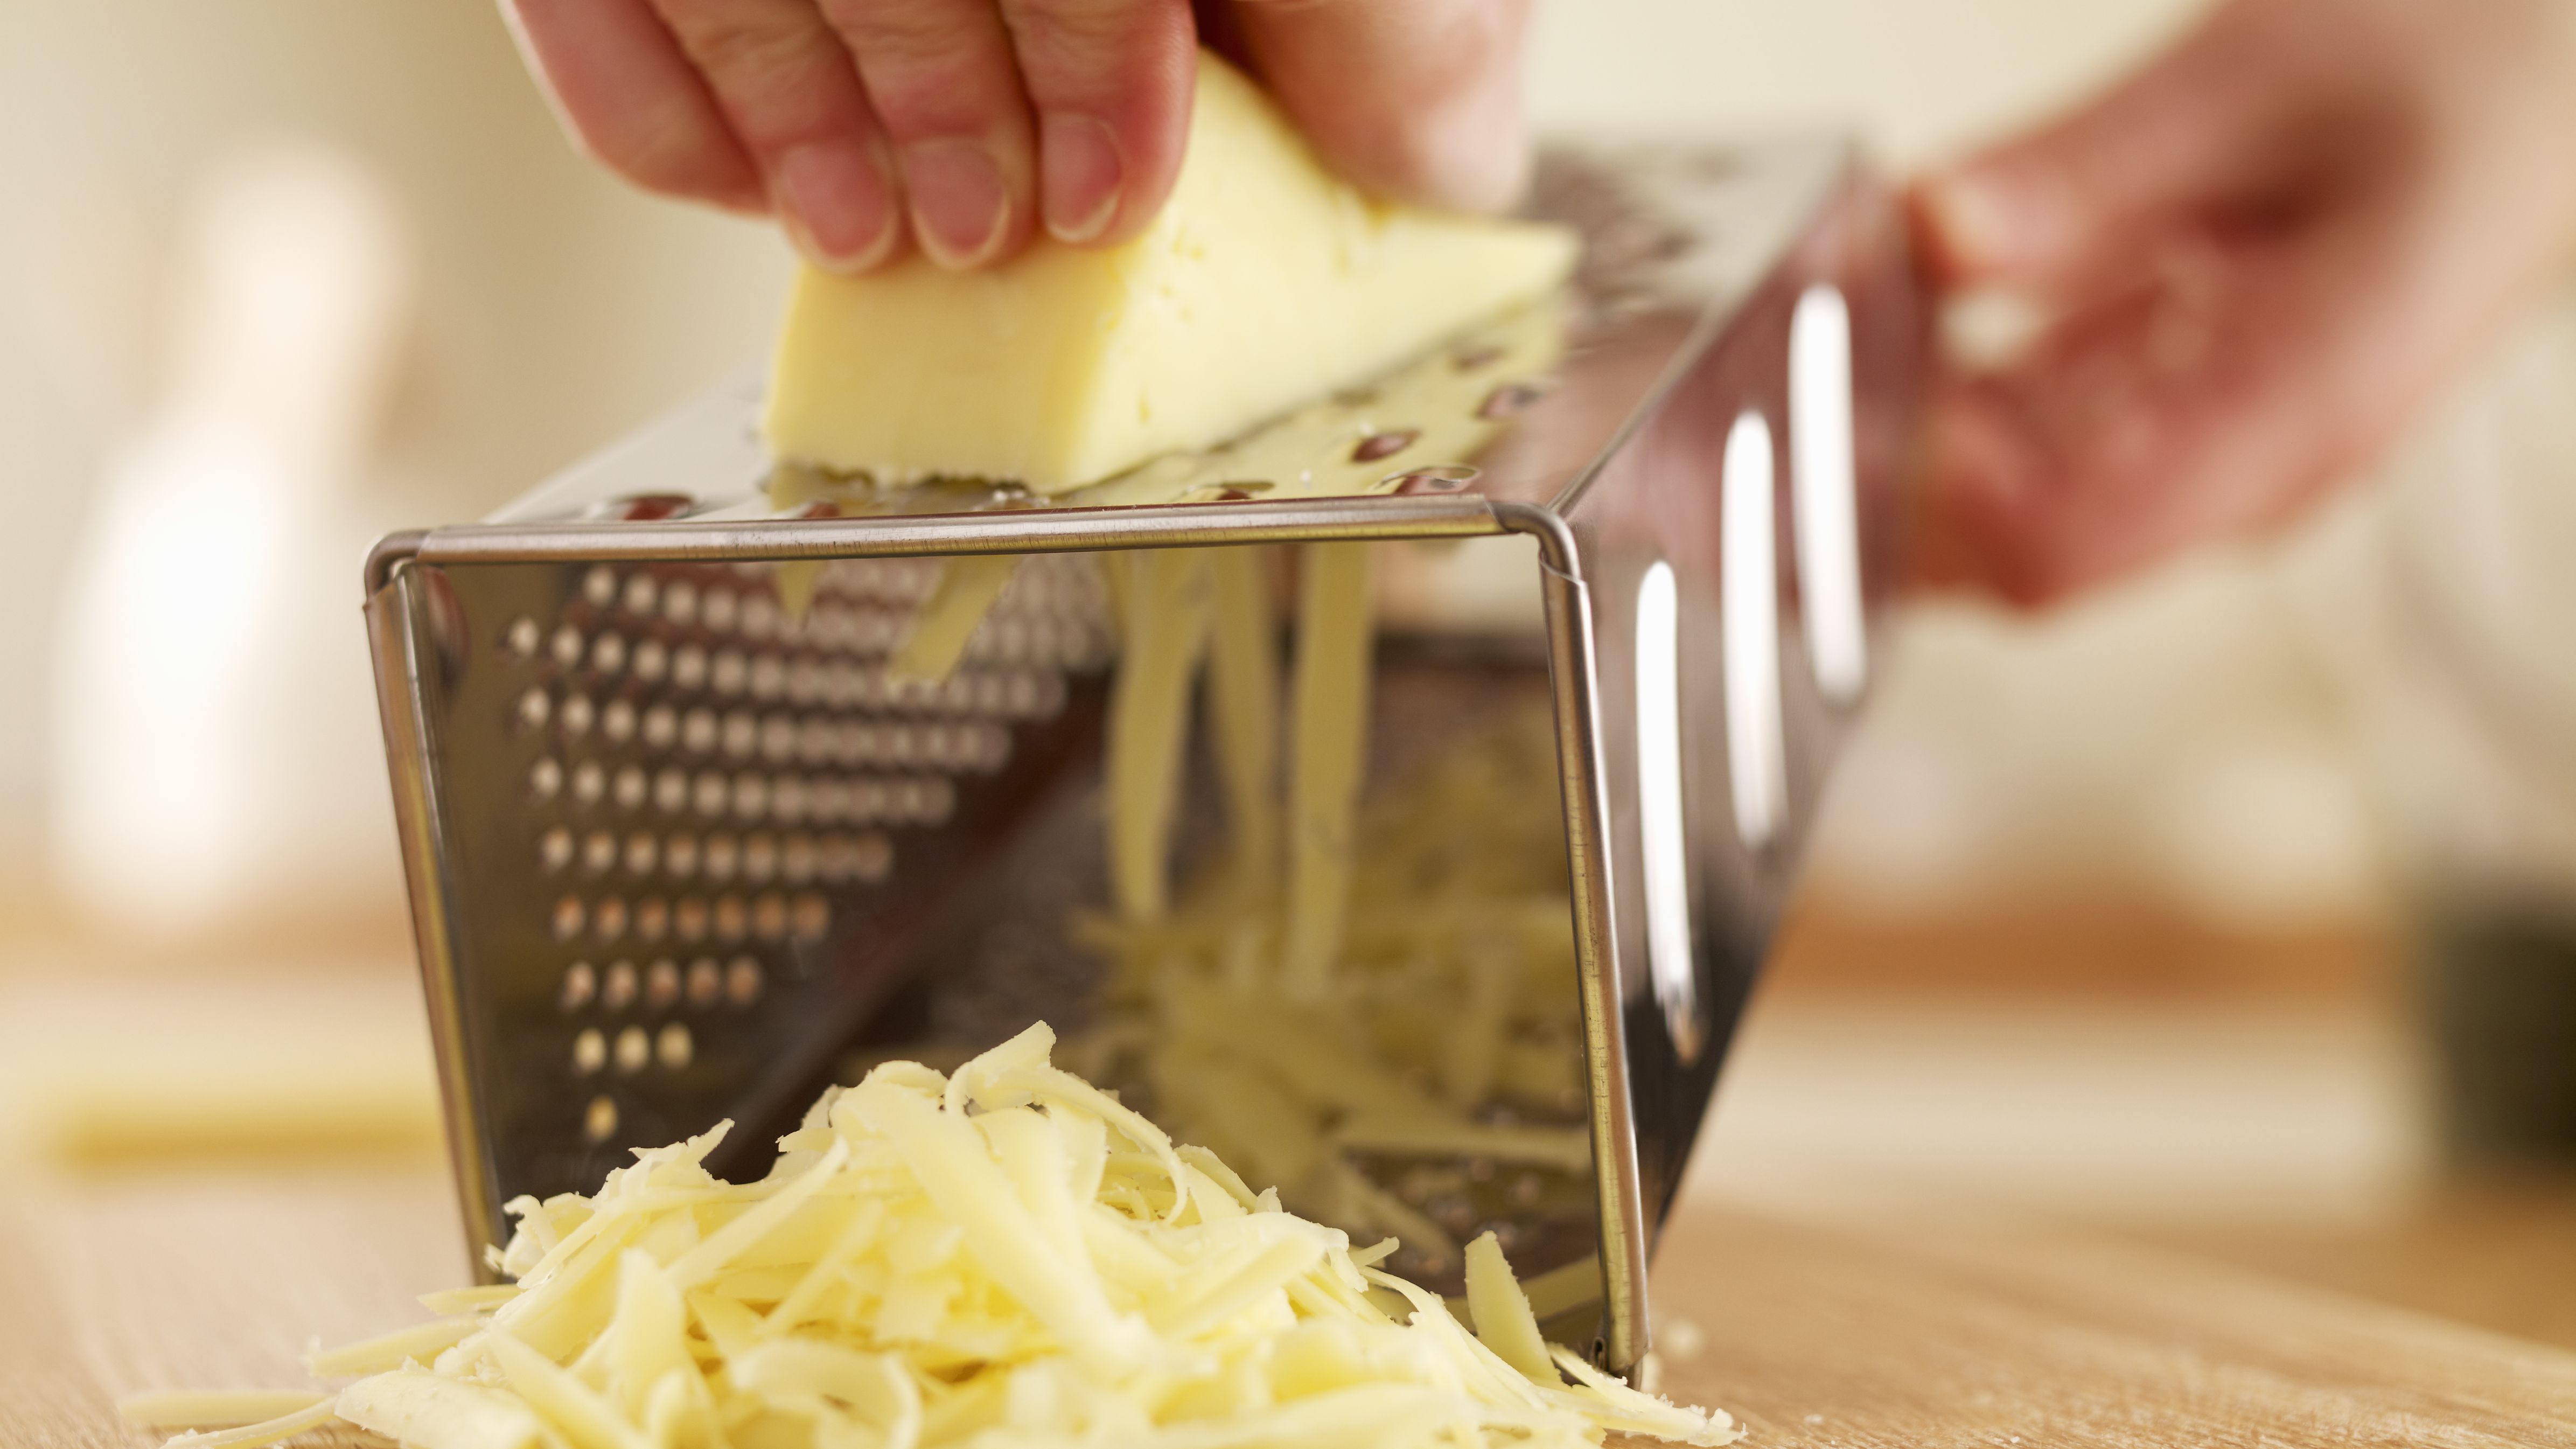 Overview of the Best Cheese Graters